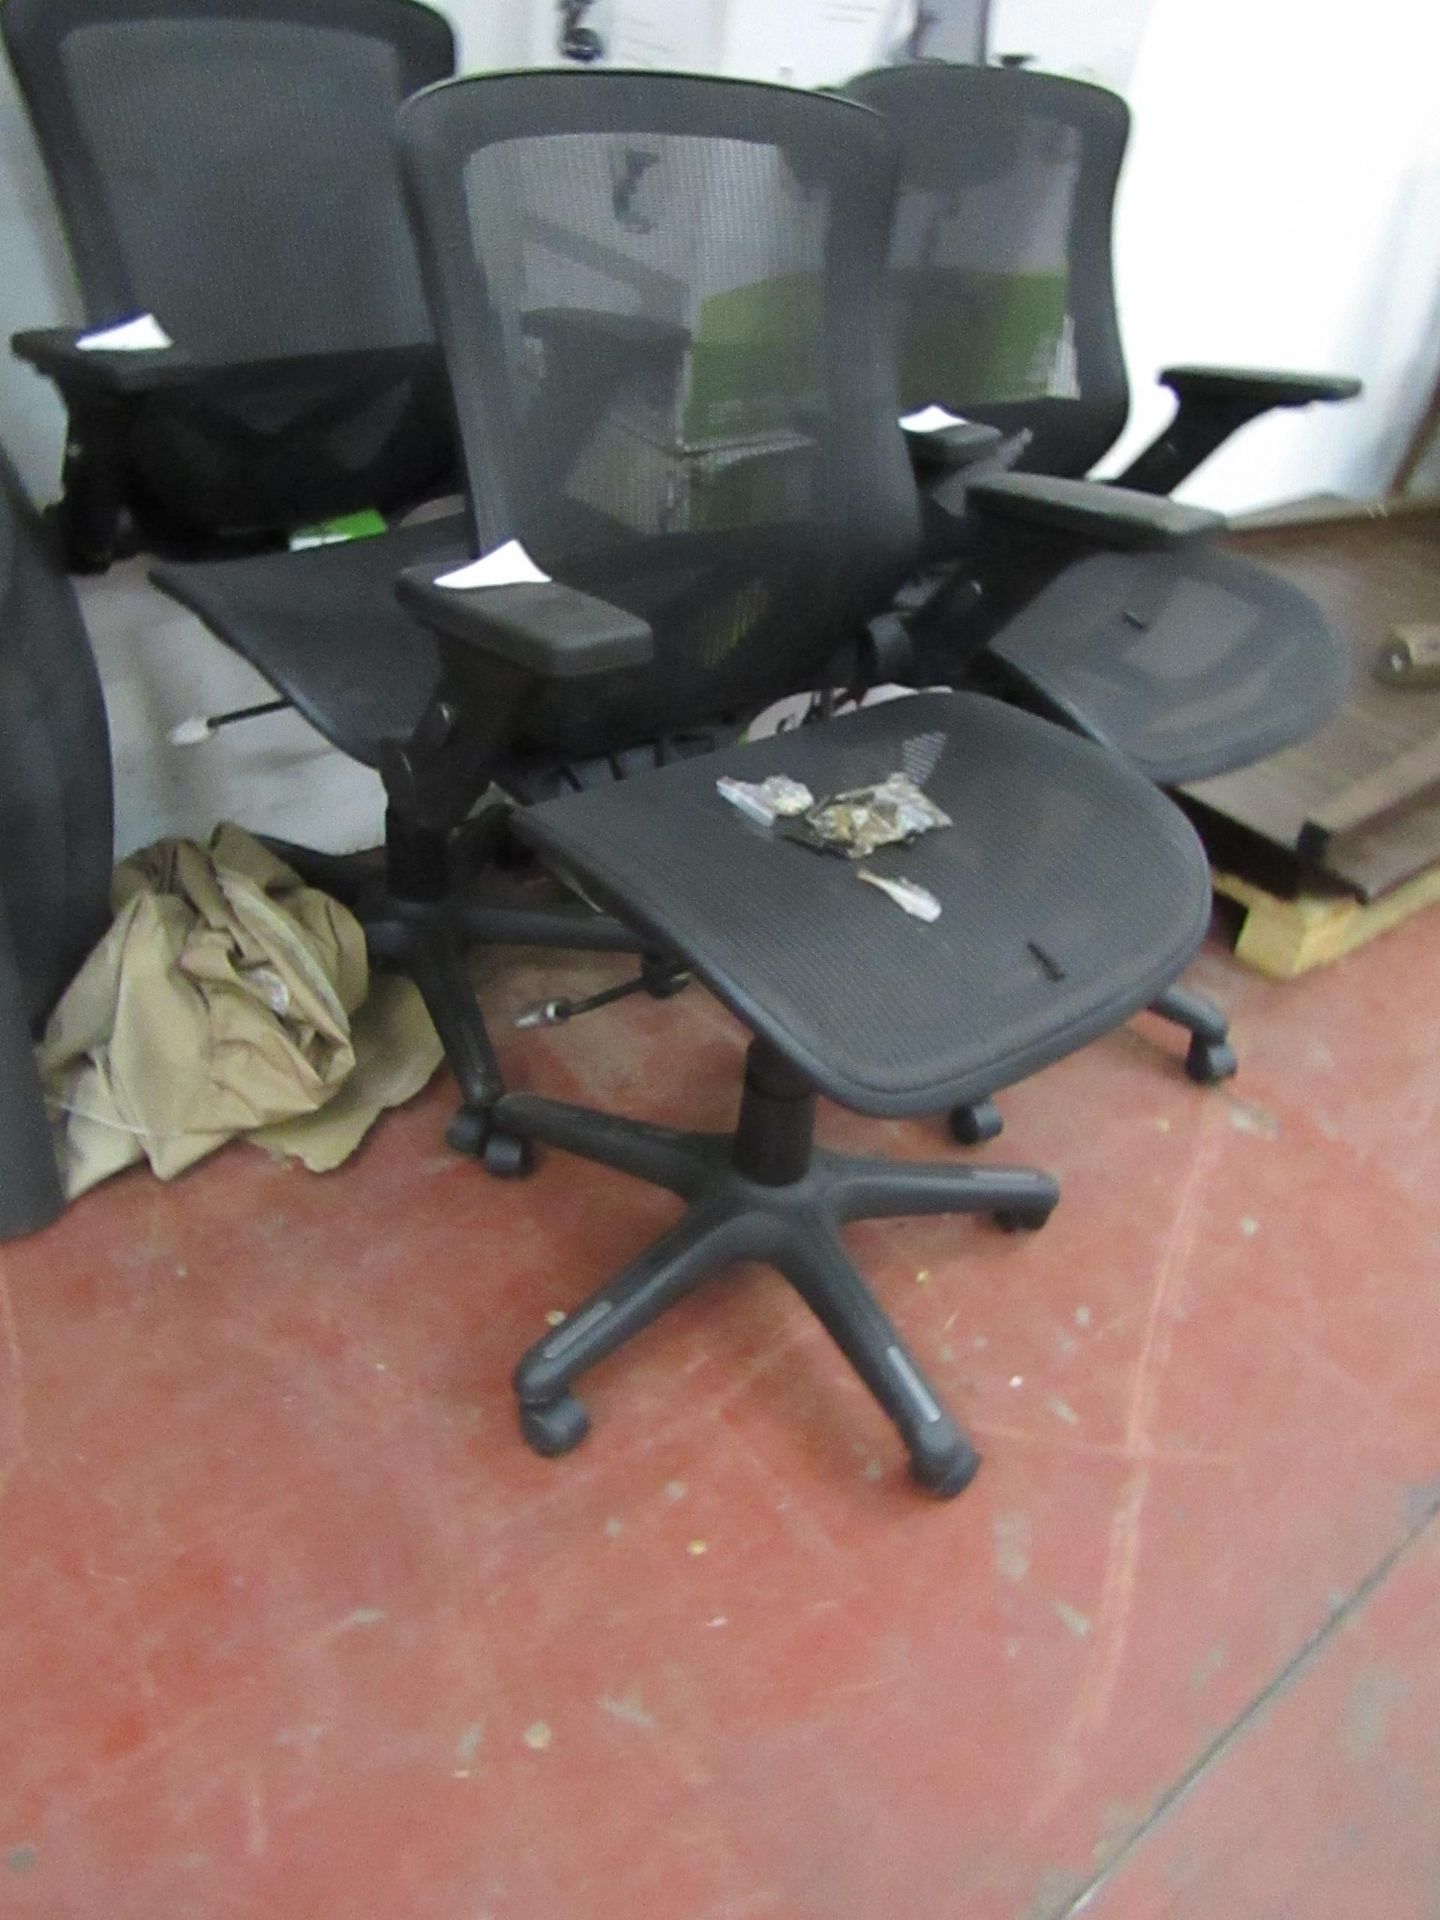 Bayside Mesh Office Chair, With Box